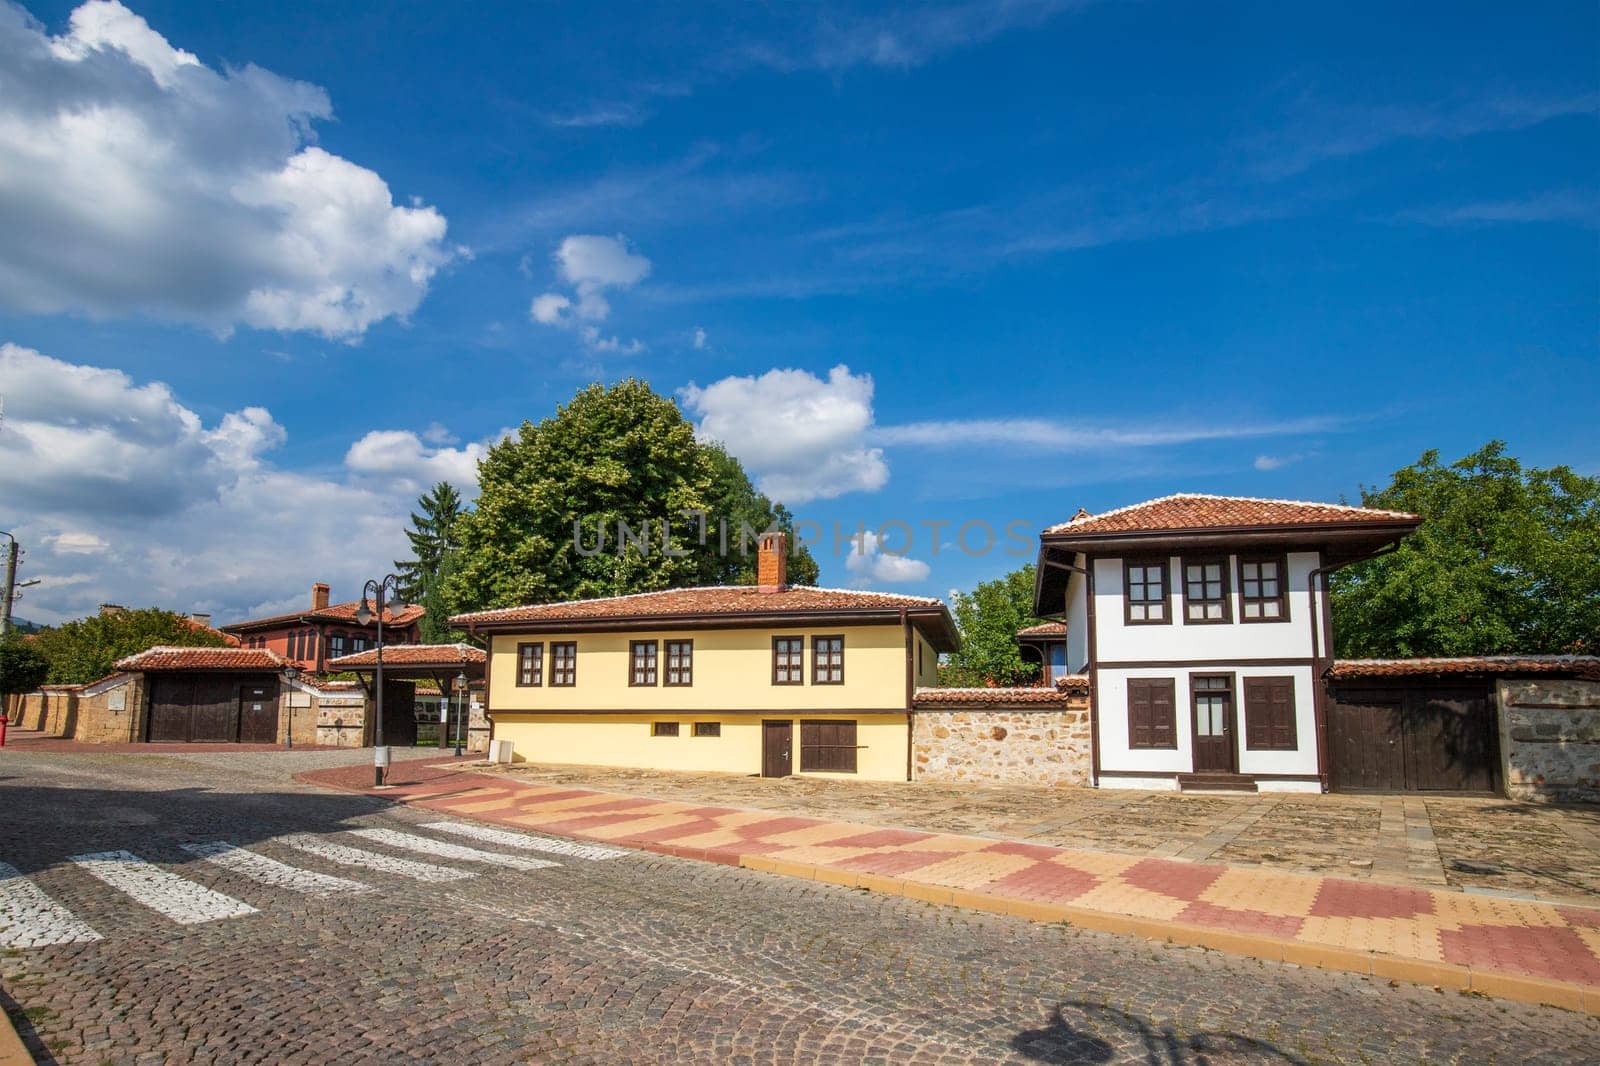 The complex of the Historical museum in the town of Panagyurishte, Pazardzhik Region, Bulgaria